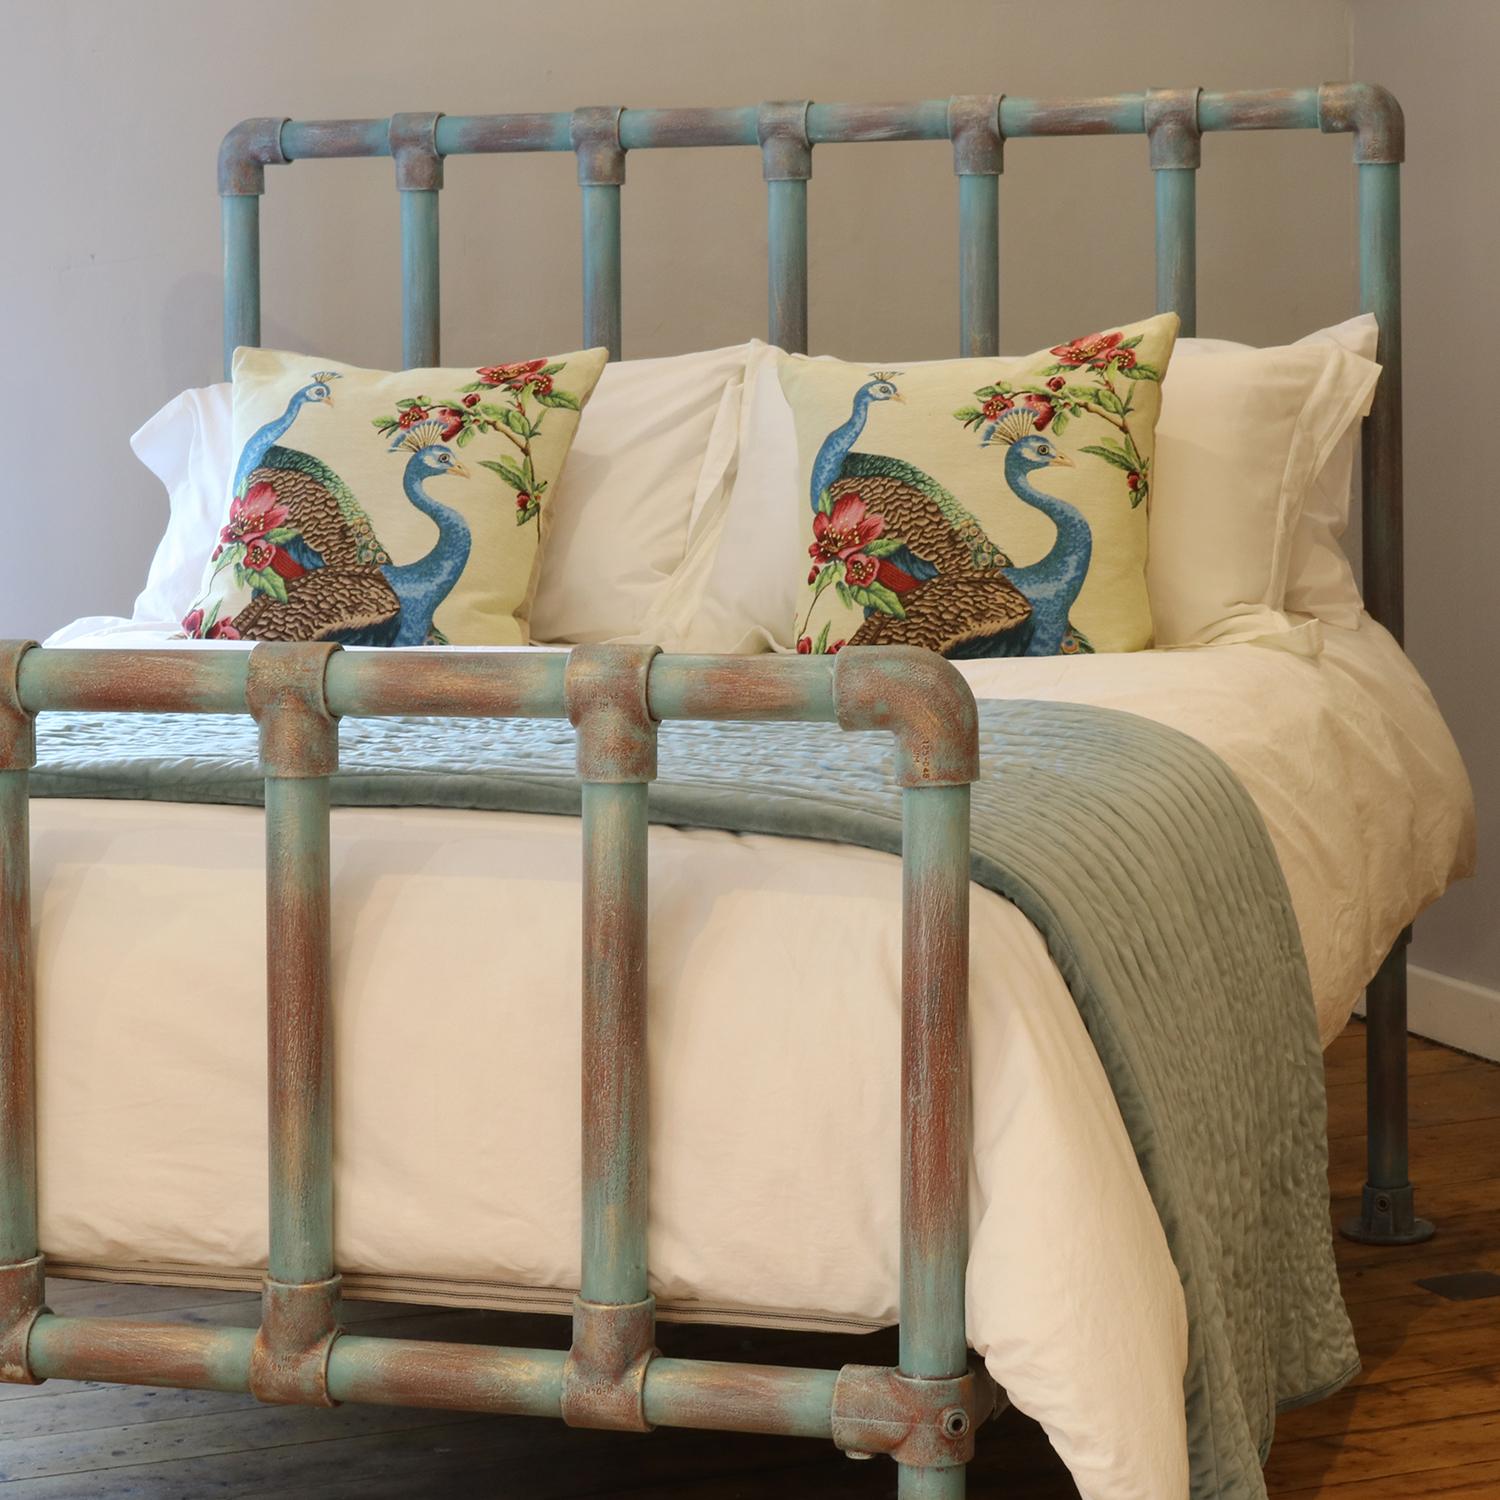 A bespoke made-to-measure iron bed made from recycled scaffolding fittings and tube. This particular piece has been hand painted in our blue verdigris but you can have your own choice of colour when ordering. Either select from our range of colours